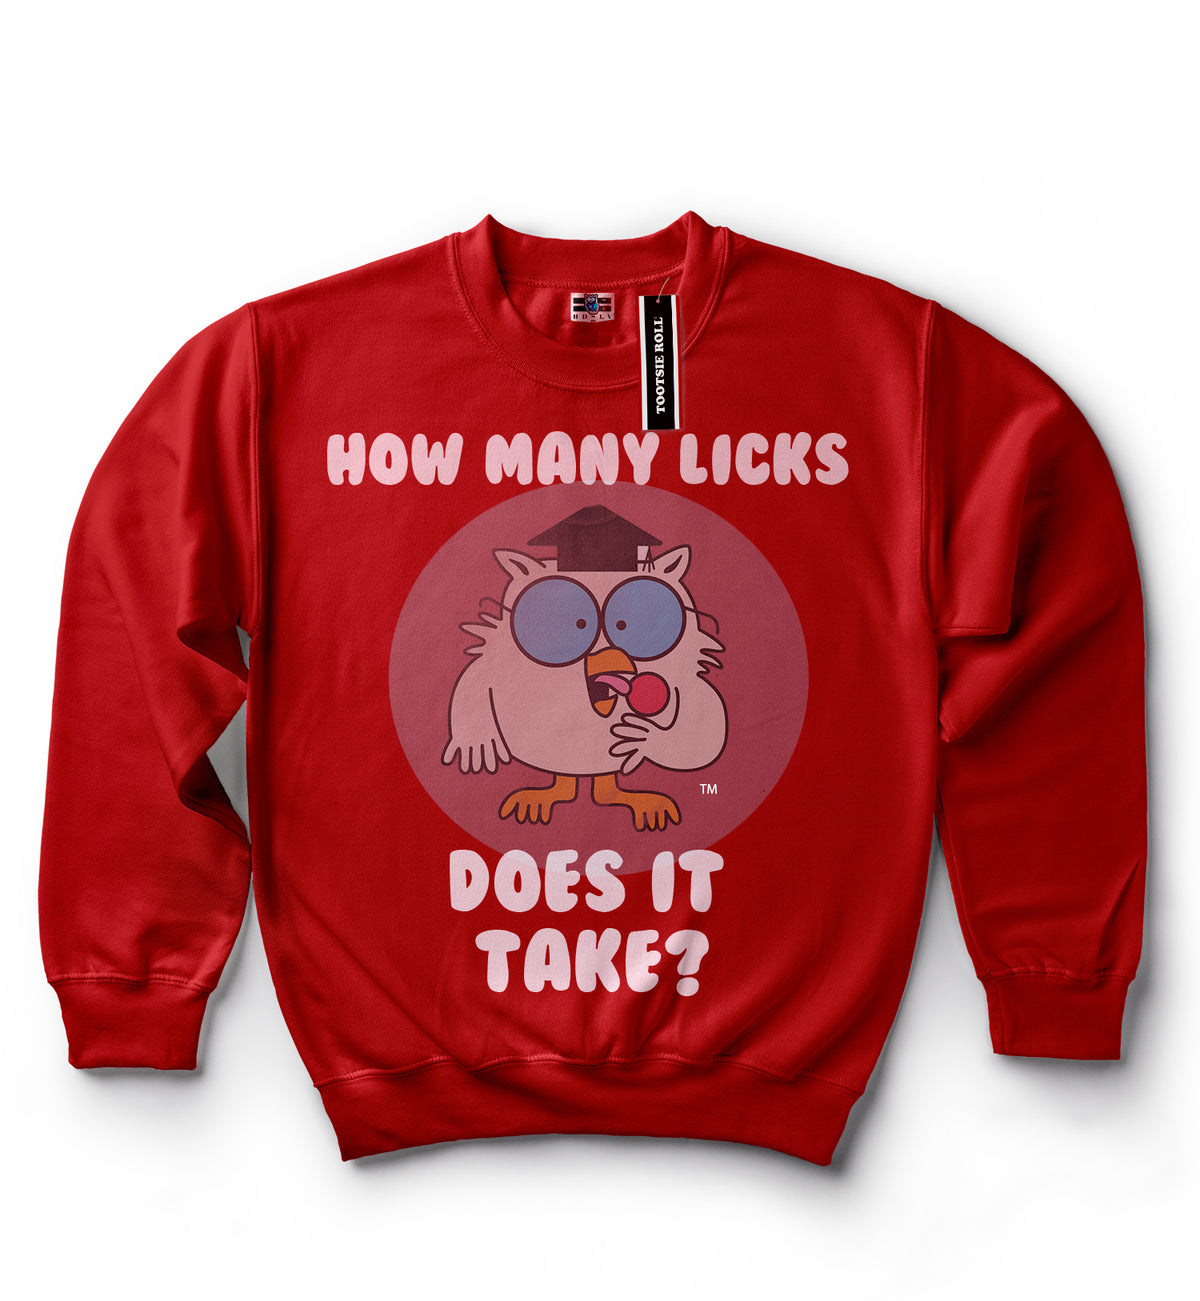 Shop and Buy 1990s Inspired Clothes | Tootsie Roll | Mr. Owl How Many Licks | Red Crew Neck